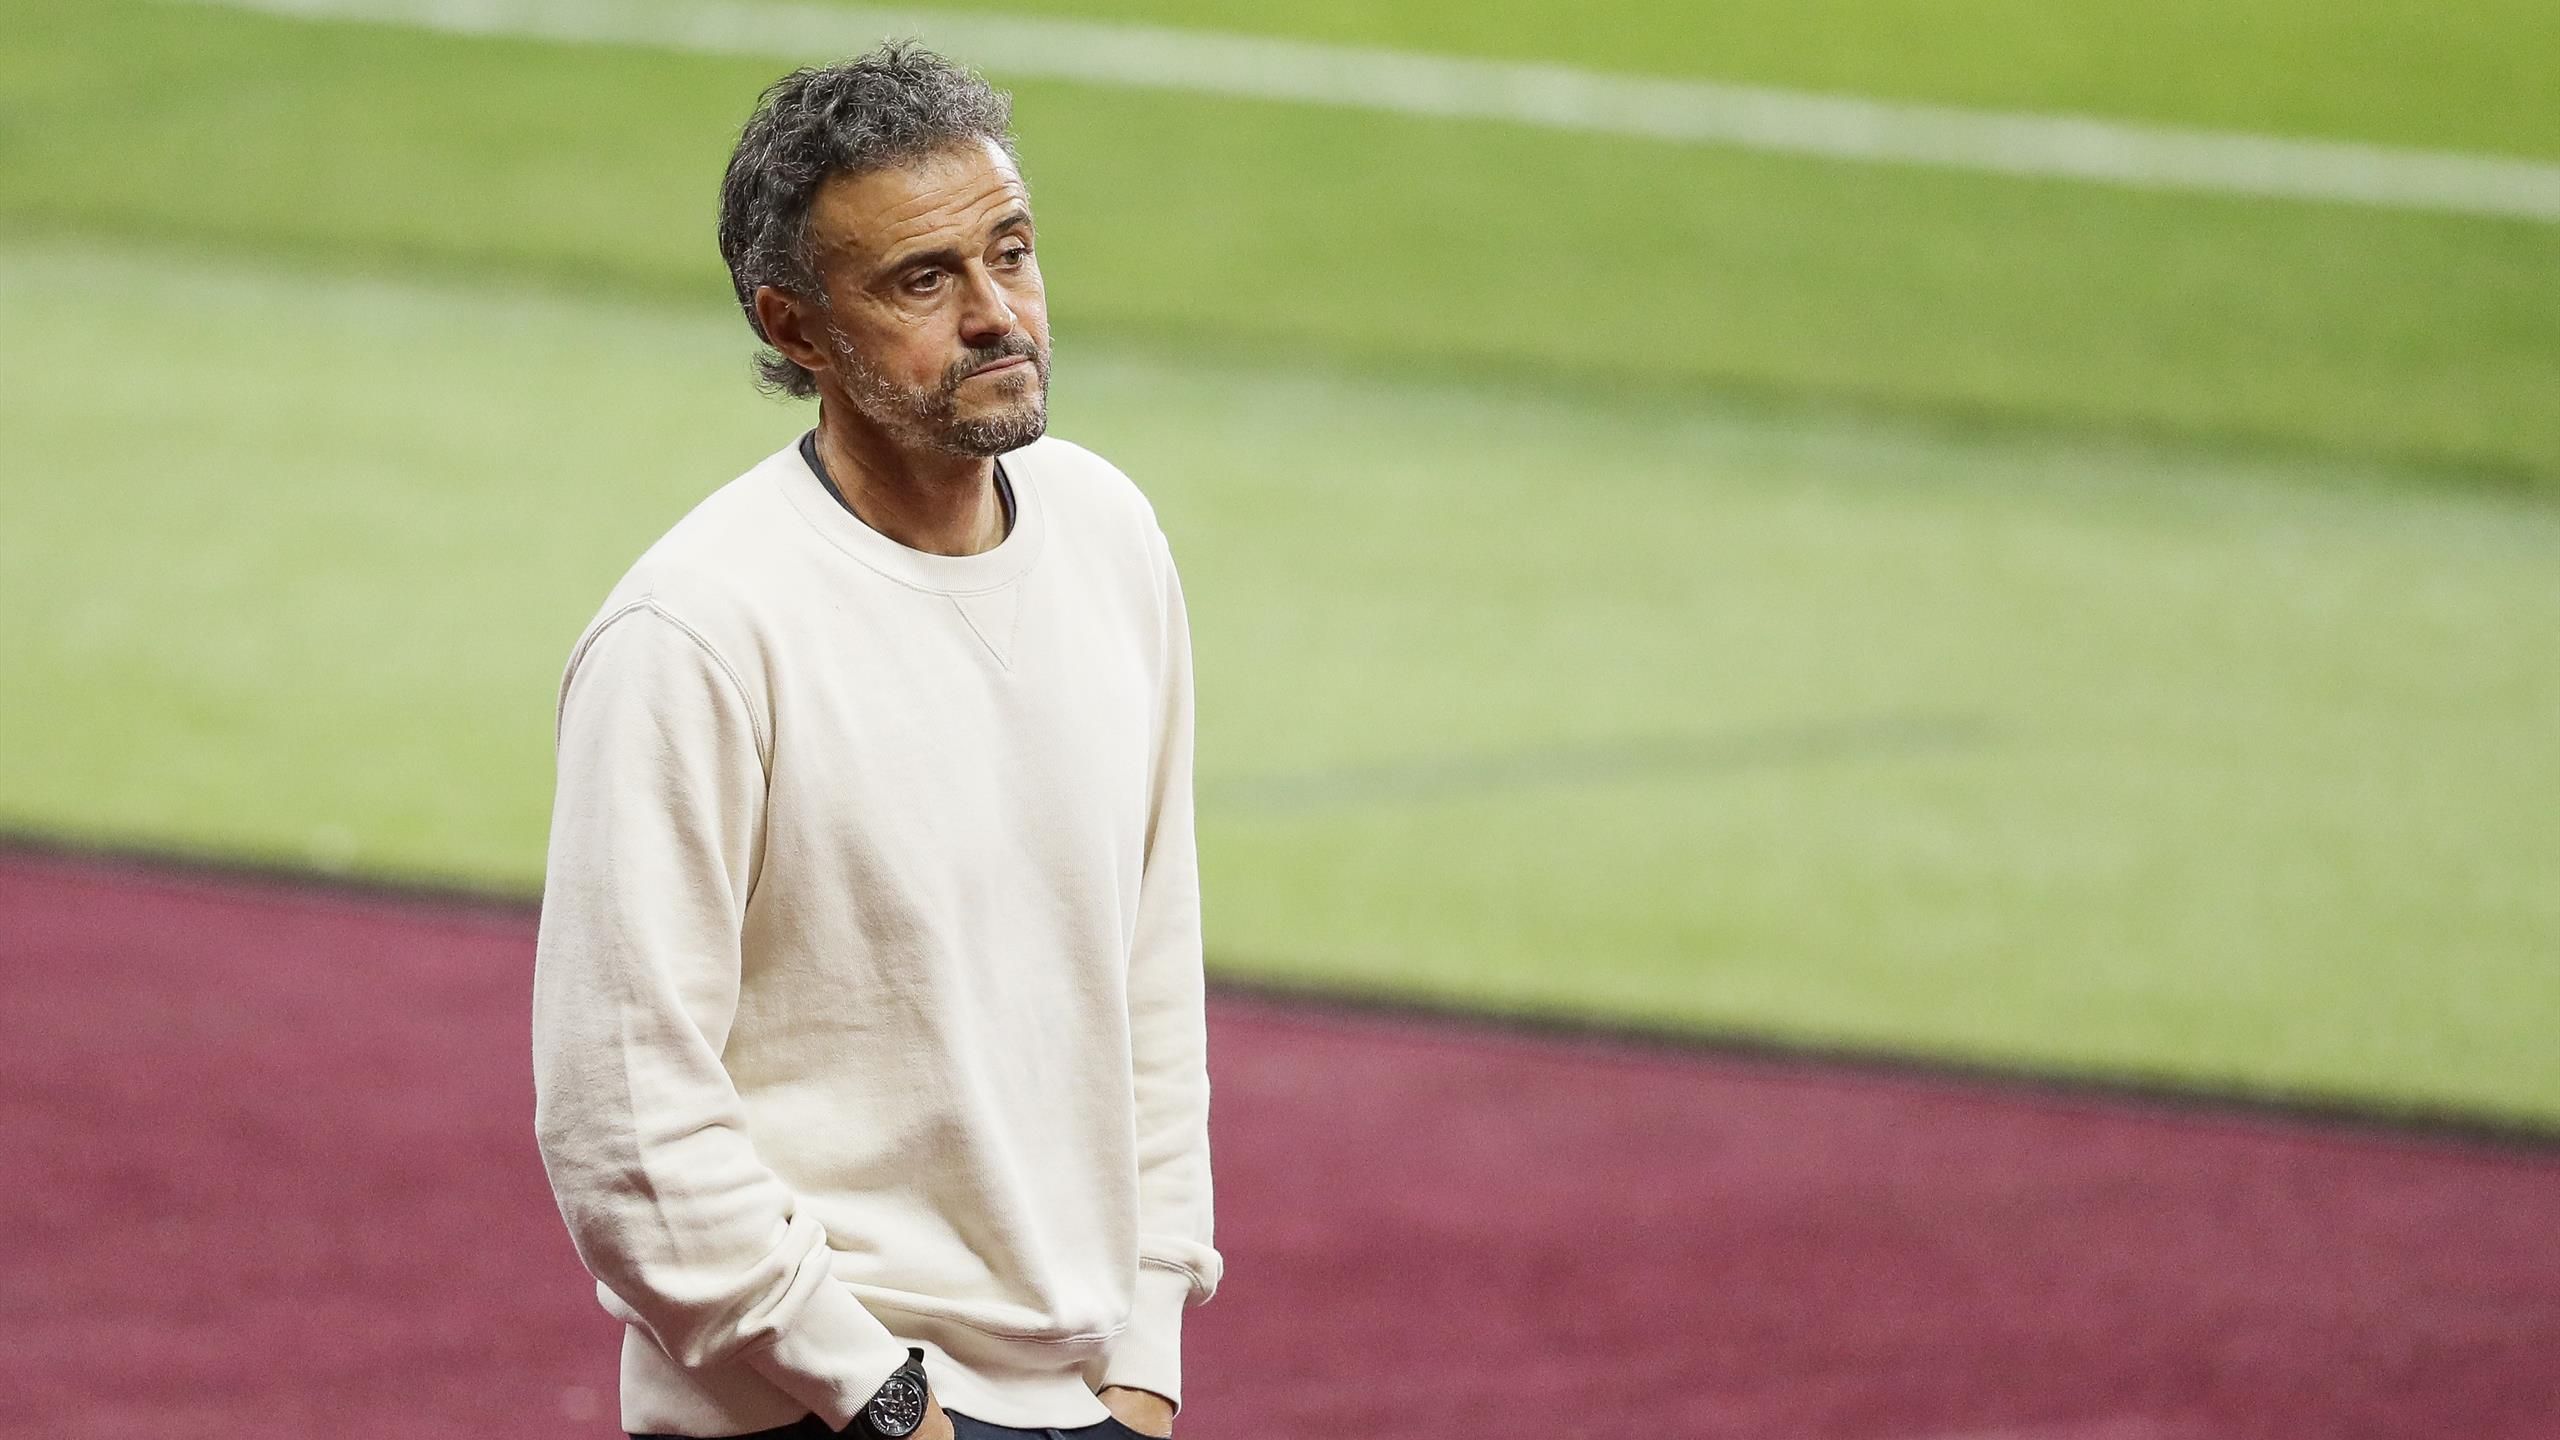 Euro 2020 news Euro 2020 Team Preview mixing the old and the new work for Luis Enrique?